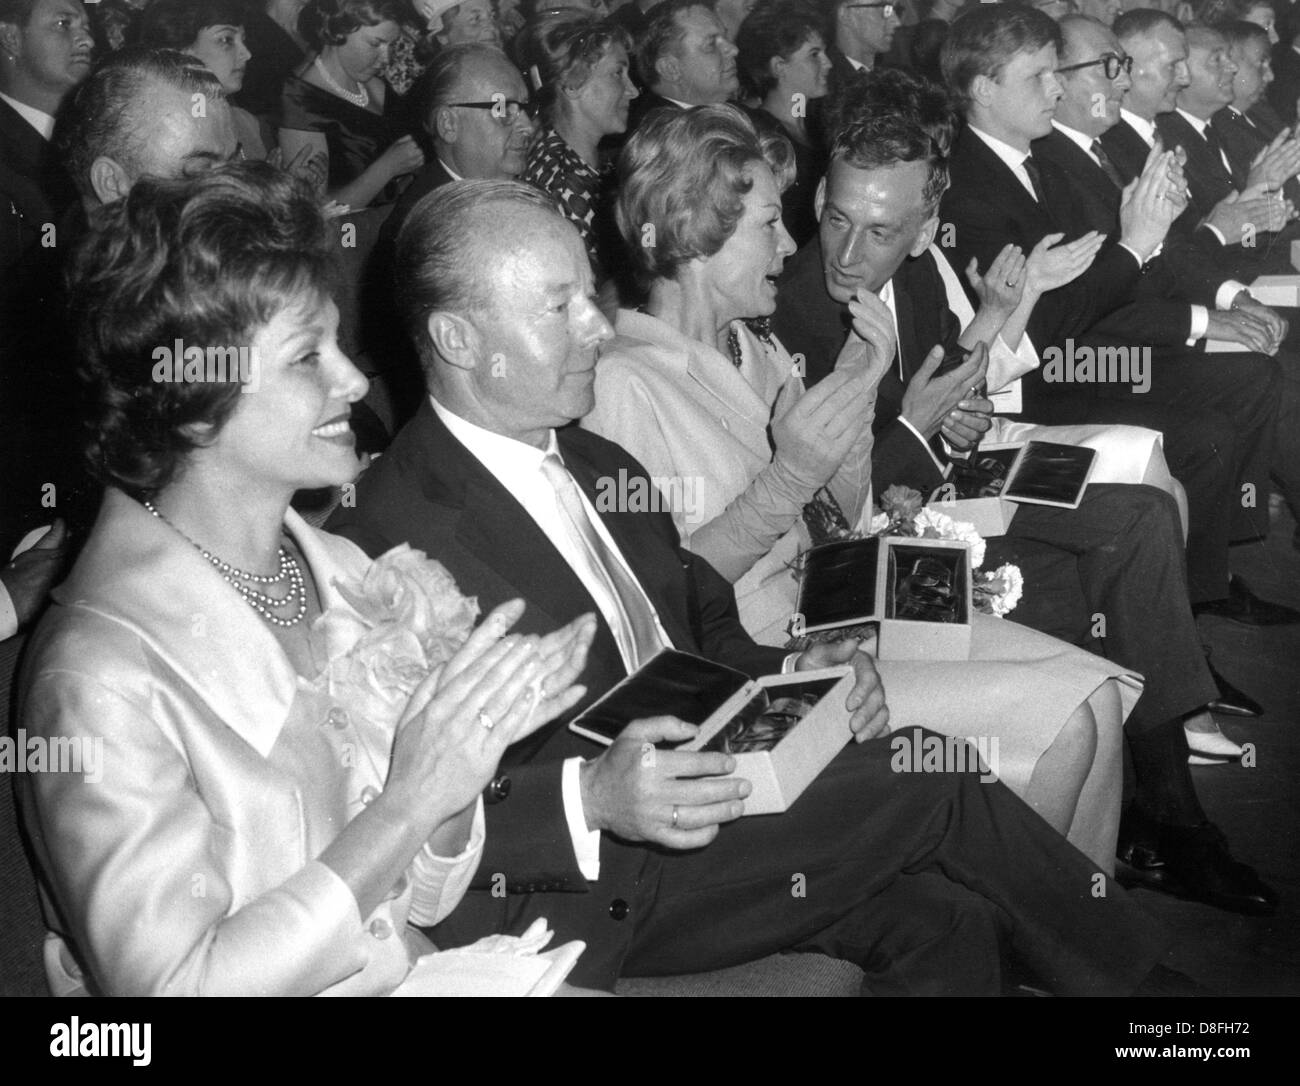 Herta Feiler, Heinz Rühmann, Hanns Lothar, Christian Doermer and Günther Anders (l-r) at the awarding ceremony of the Federal Film Awards on the 25th of June in 1961 in Berlin.     Photo: Günter Bratke +++(c) dpa - Report+++ Stock Photo